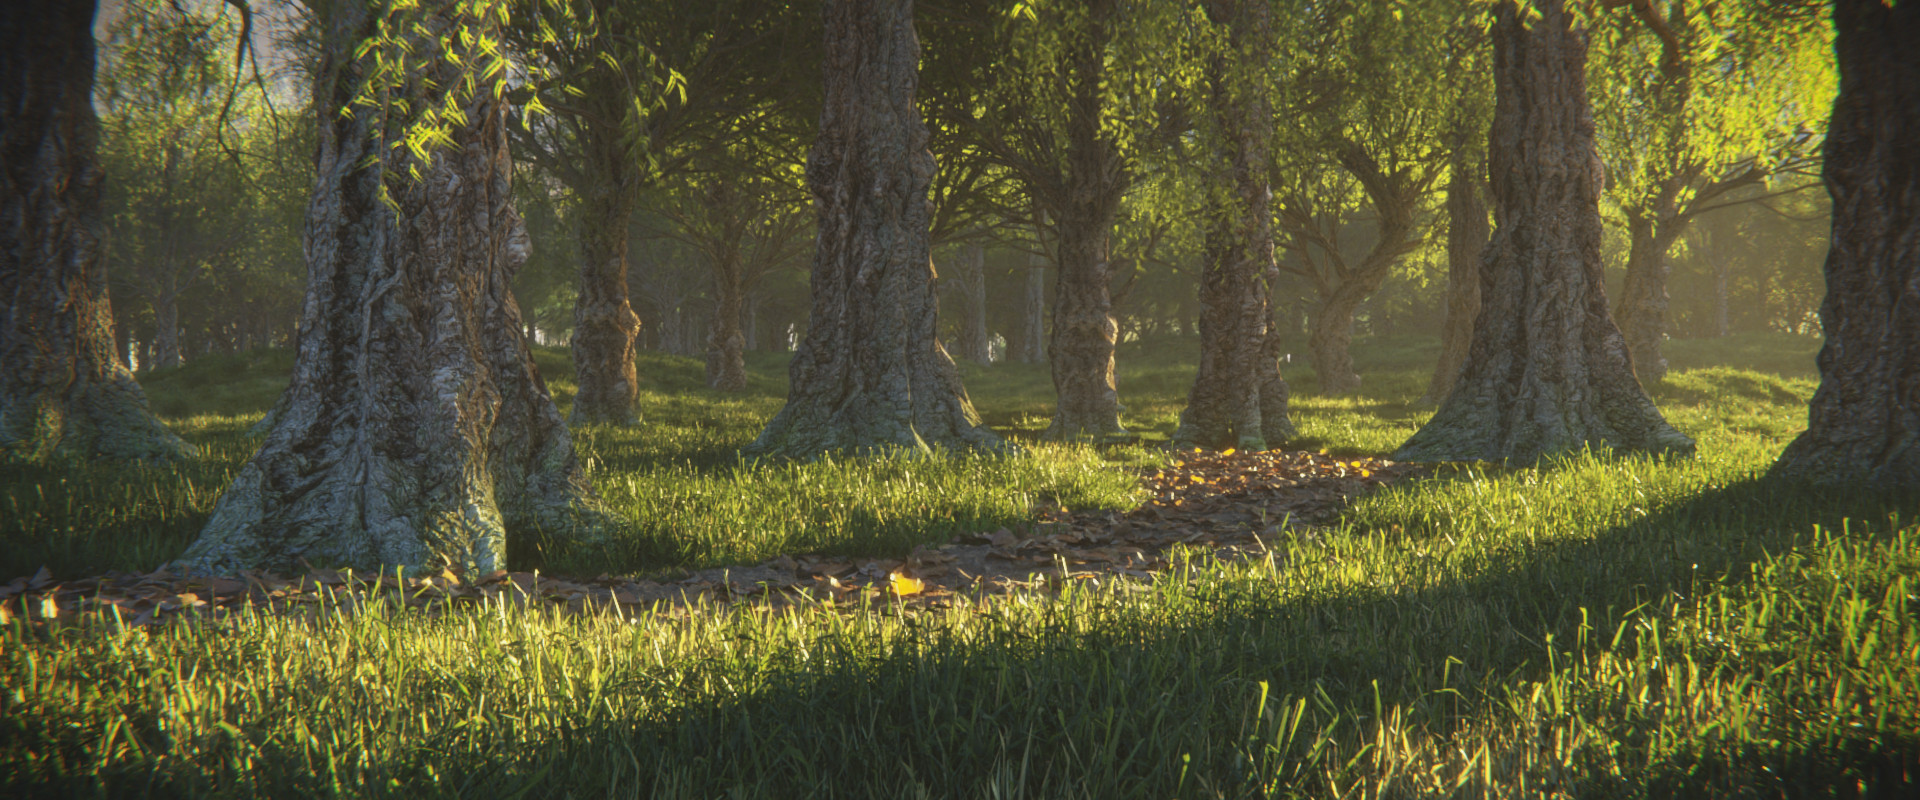 Forest Environment - Finished Projects - Blender Artists Community